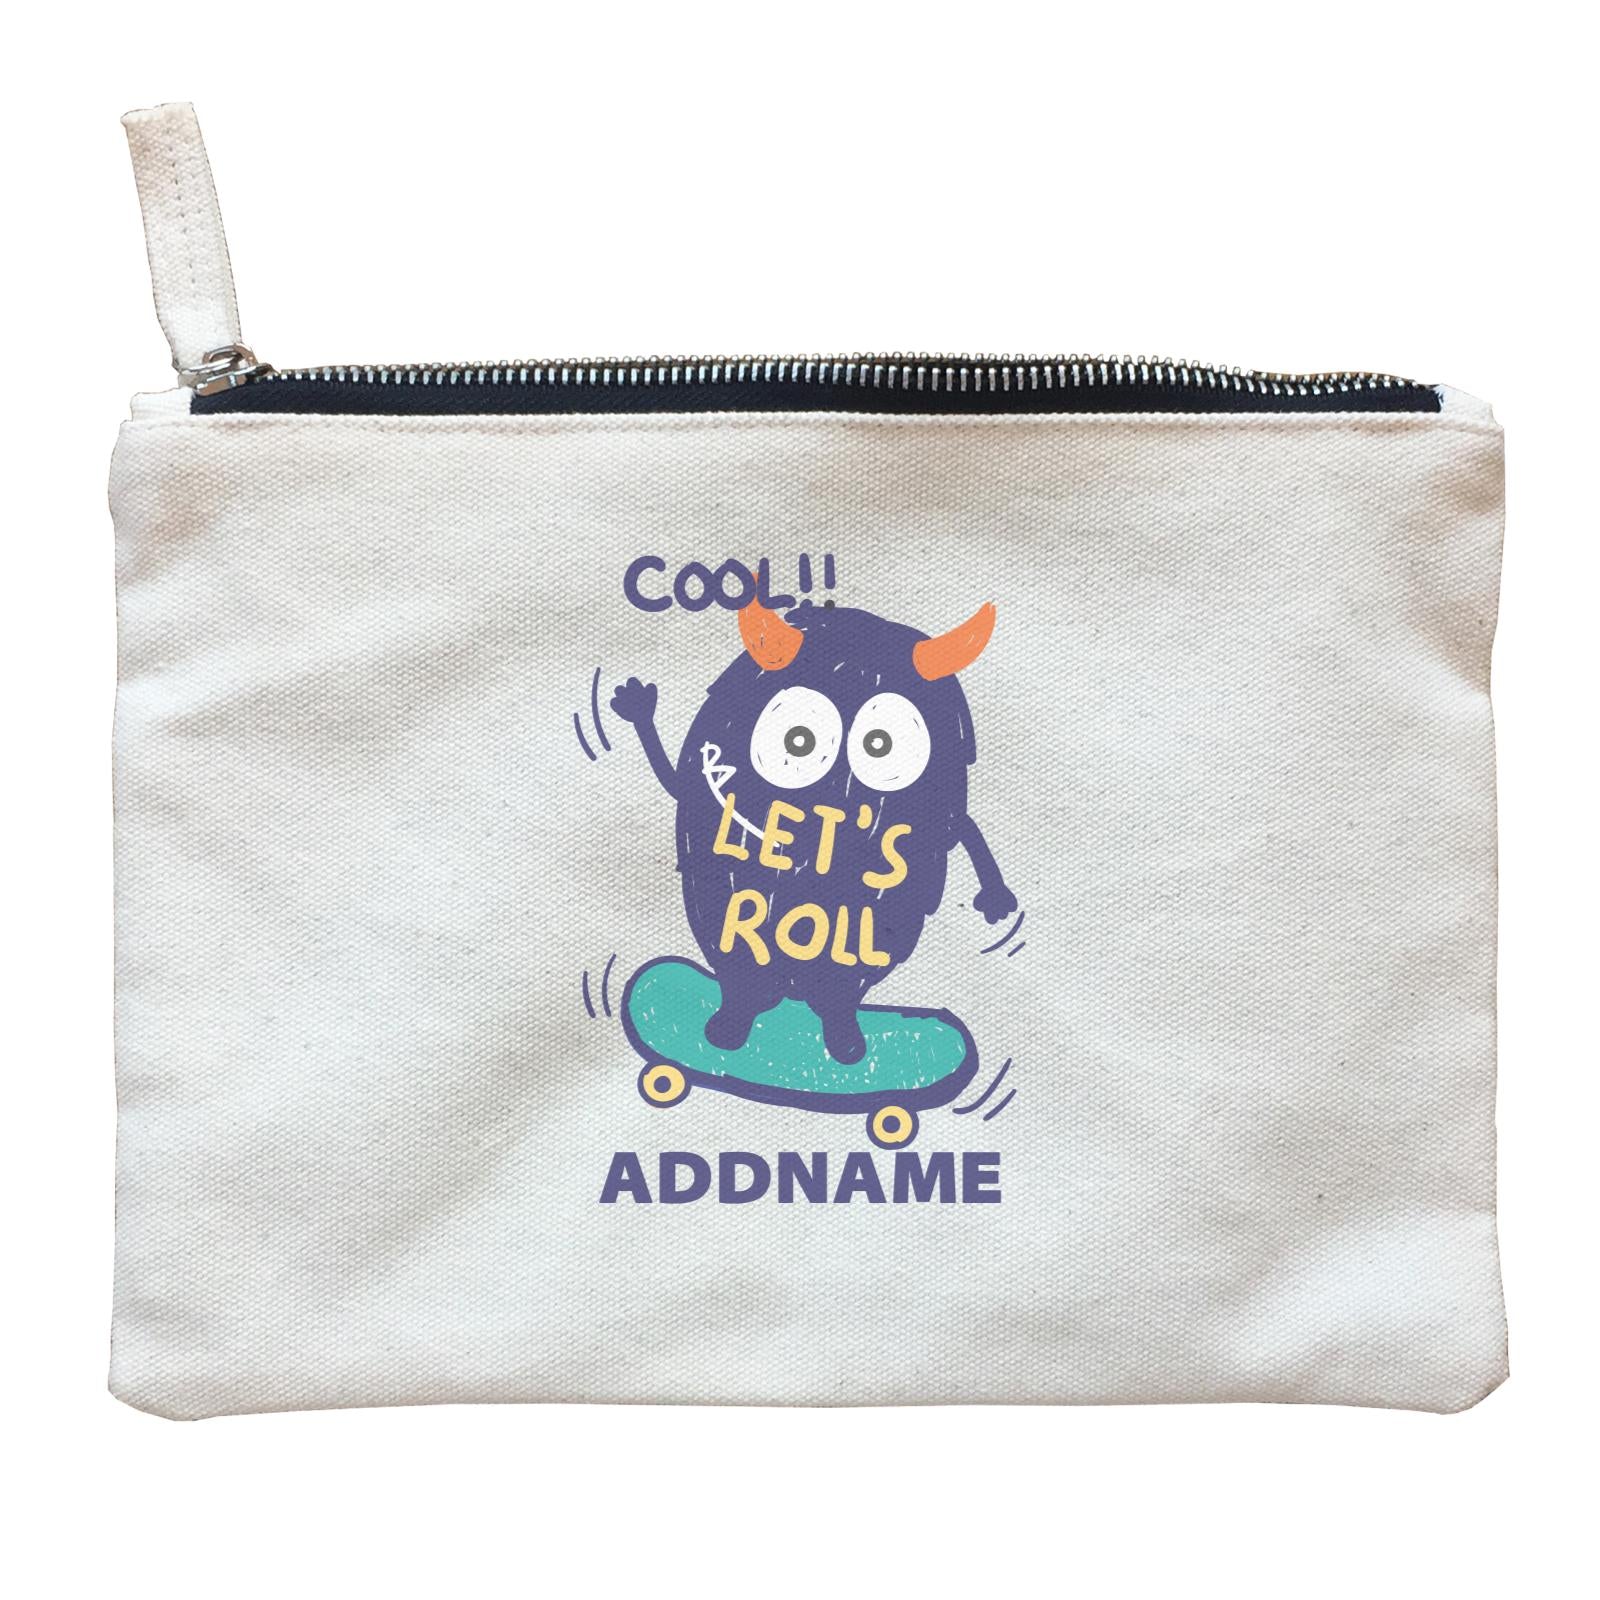 Cool Cute Monster Cool Let's Roll Monster Addname Zipper Pouch